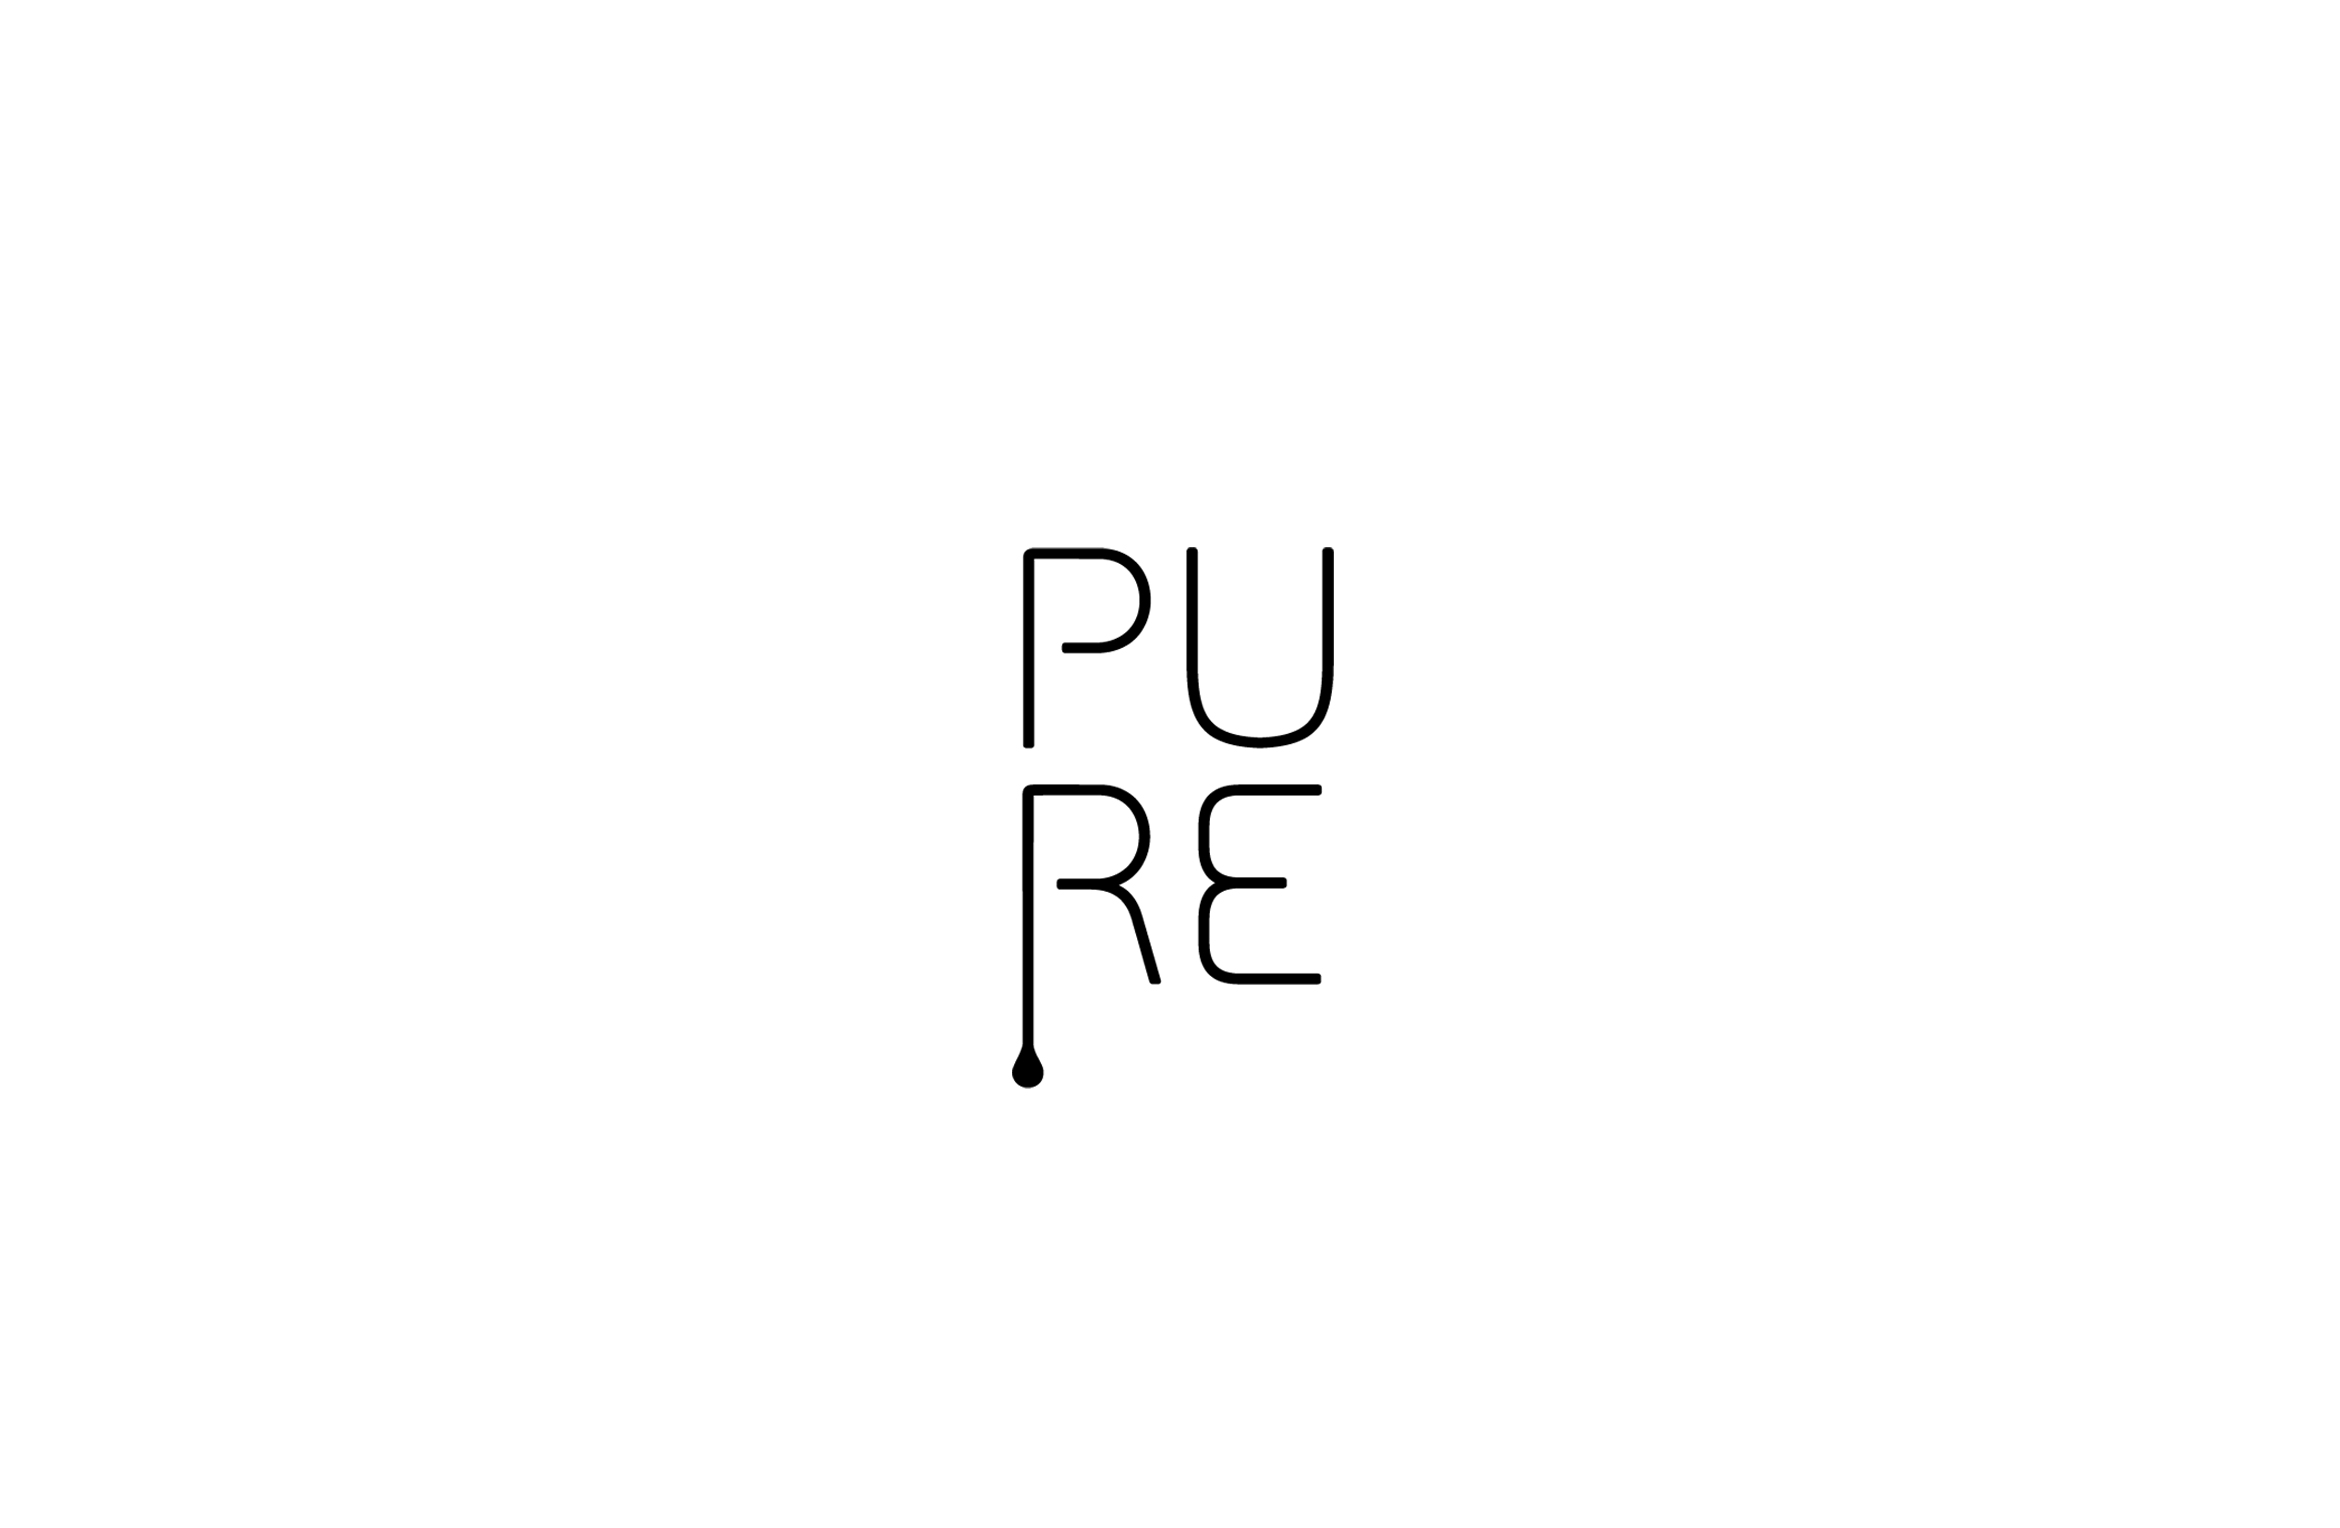 Pure oliv oil logotype